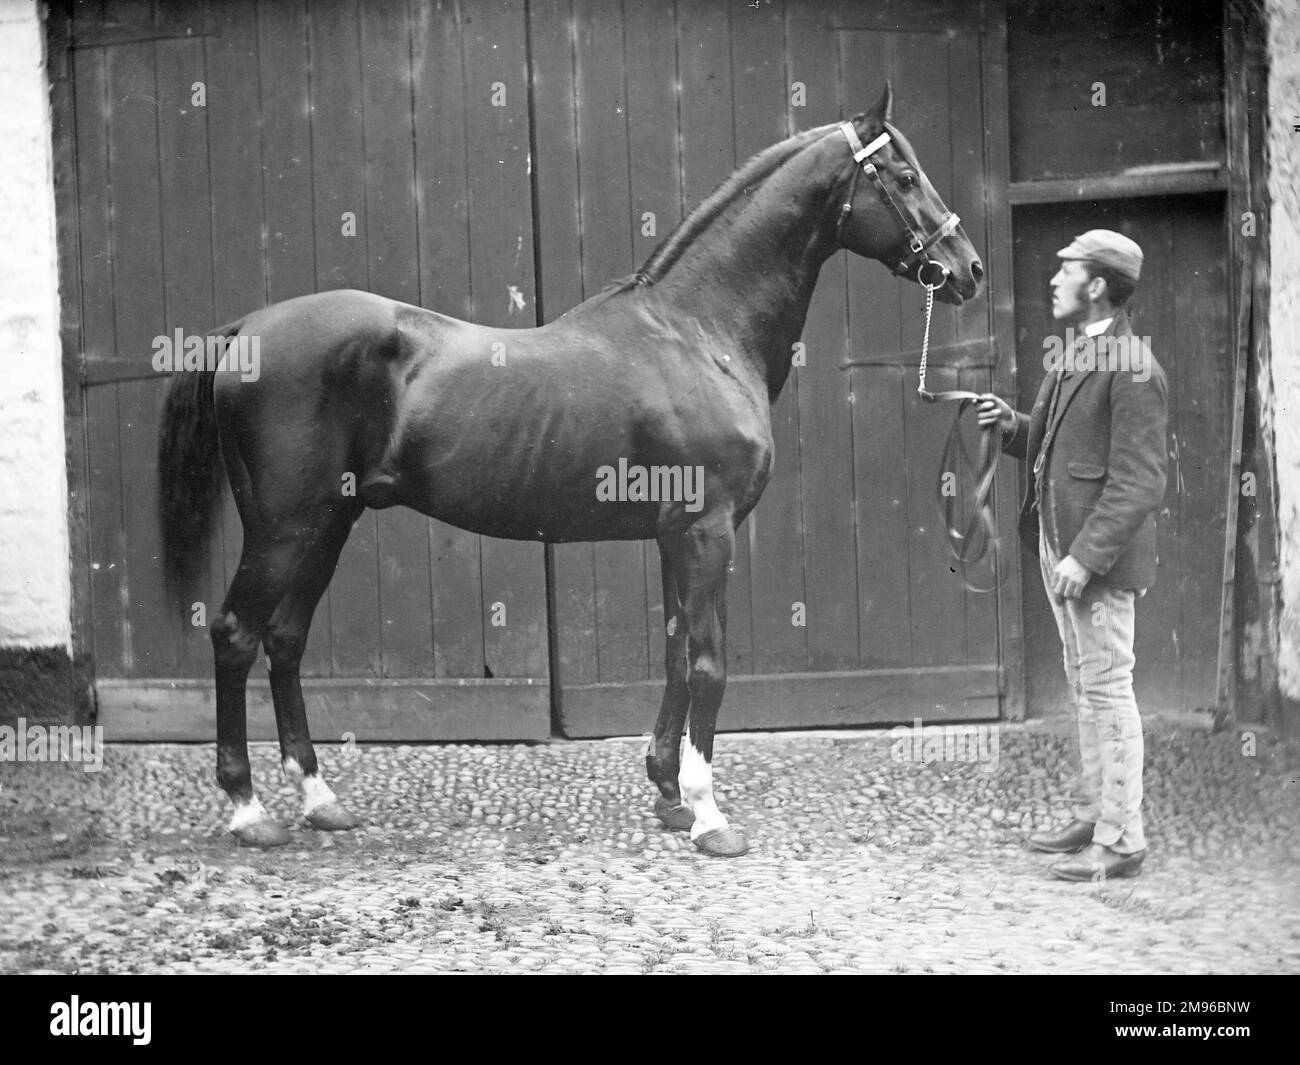 A groom with a magnificent stallion in a cobbled area in front of stable doors, probably somewhere in Mid Wales. Stock Photo